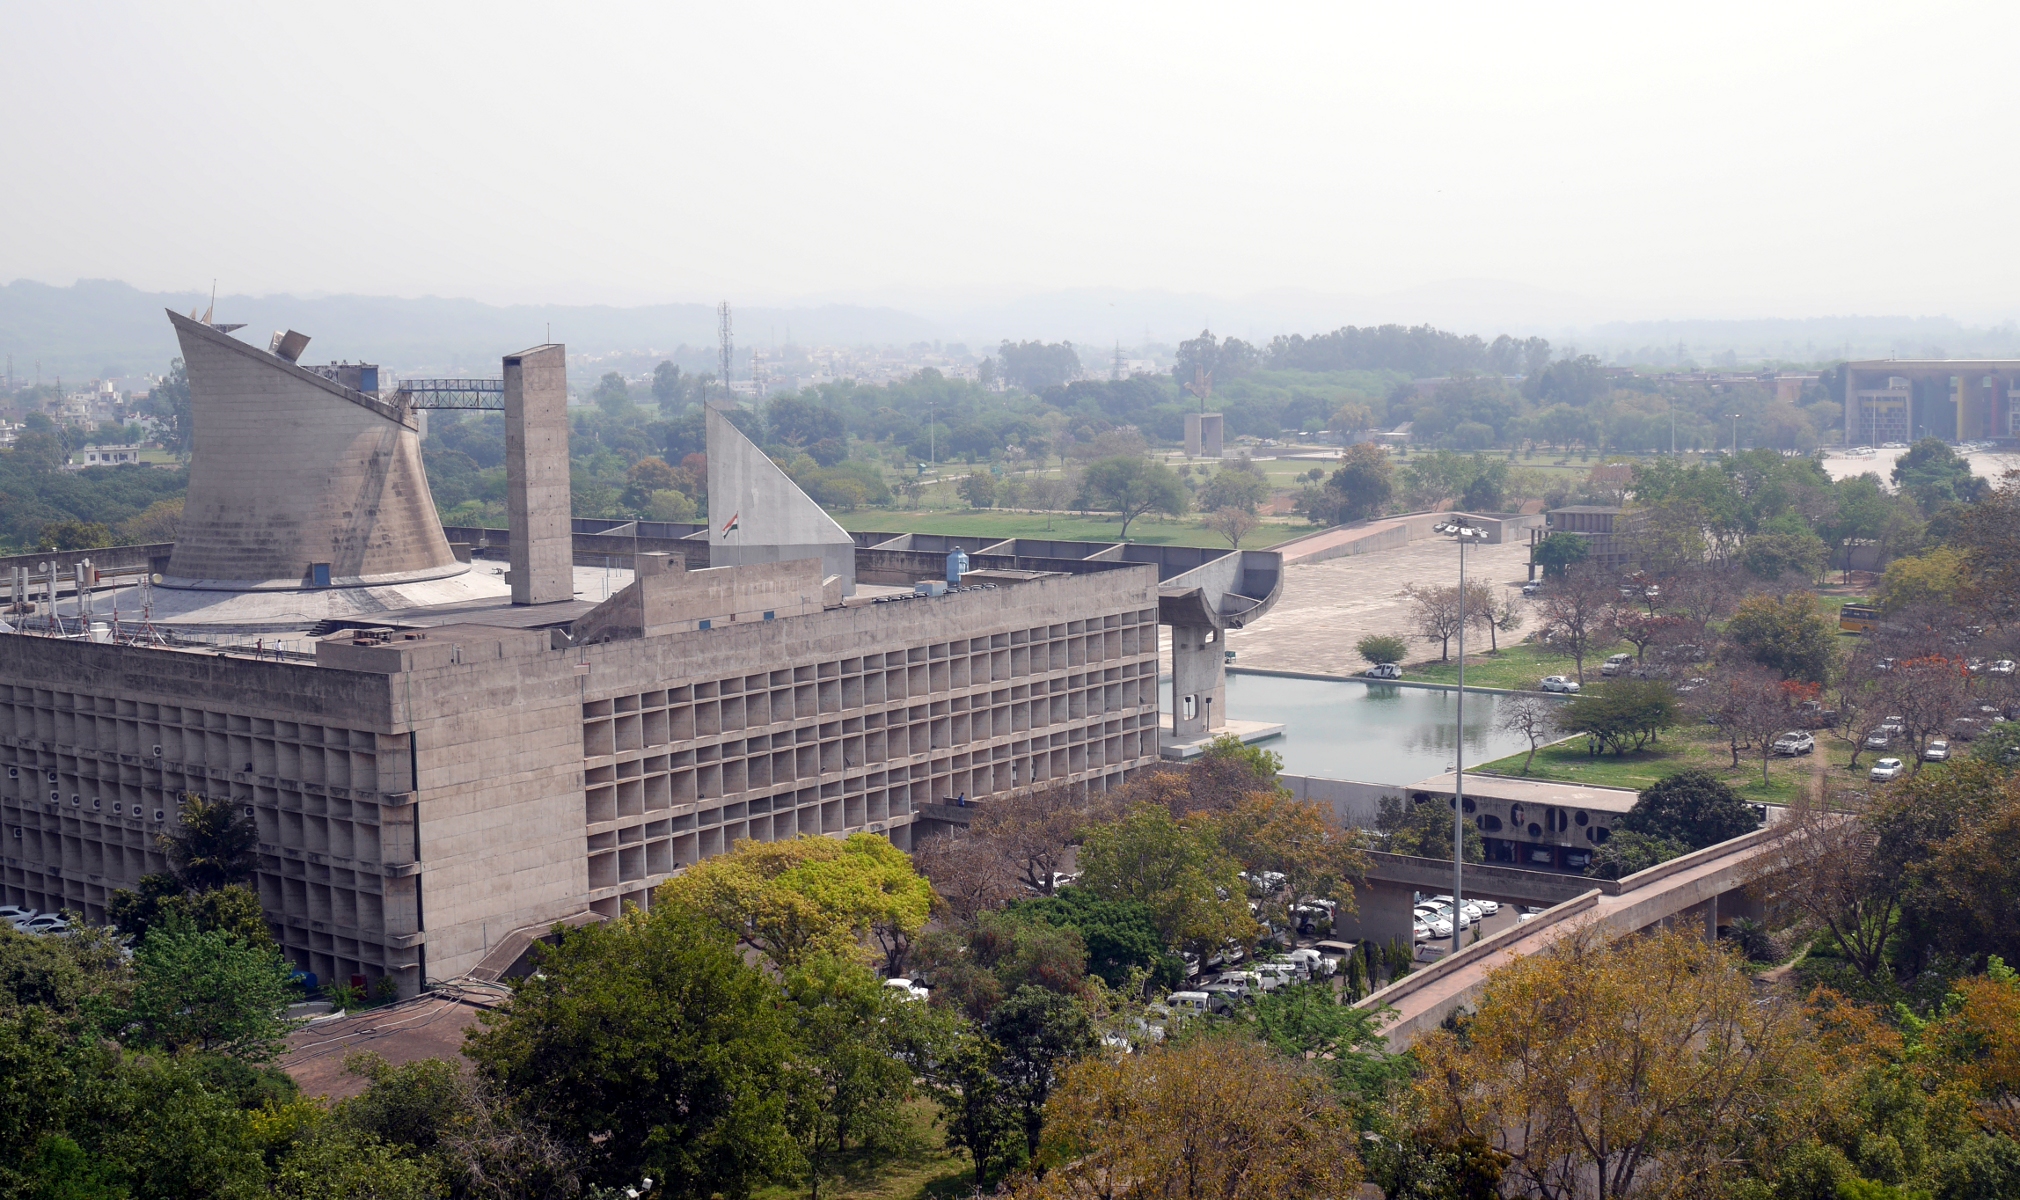 The Legislative Assembly in Chandigarh, designed by Le Corbusier.